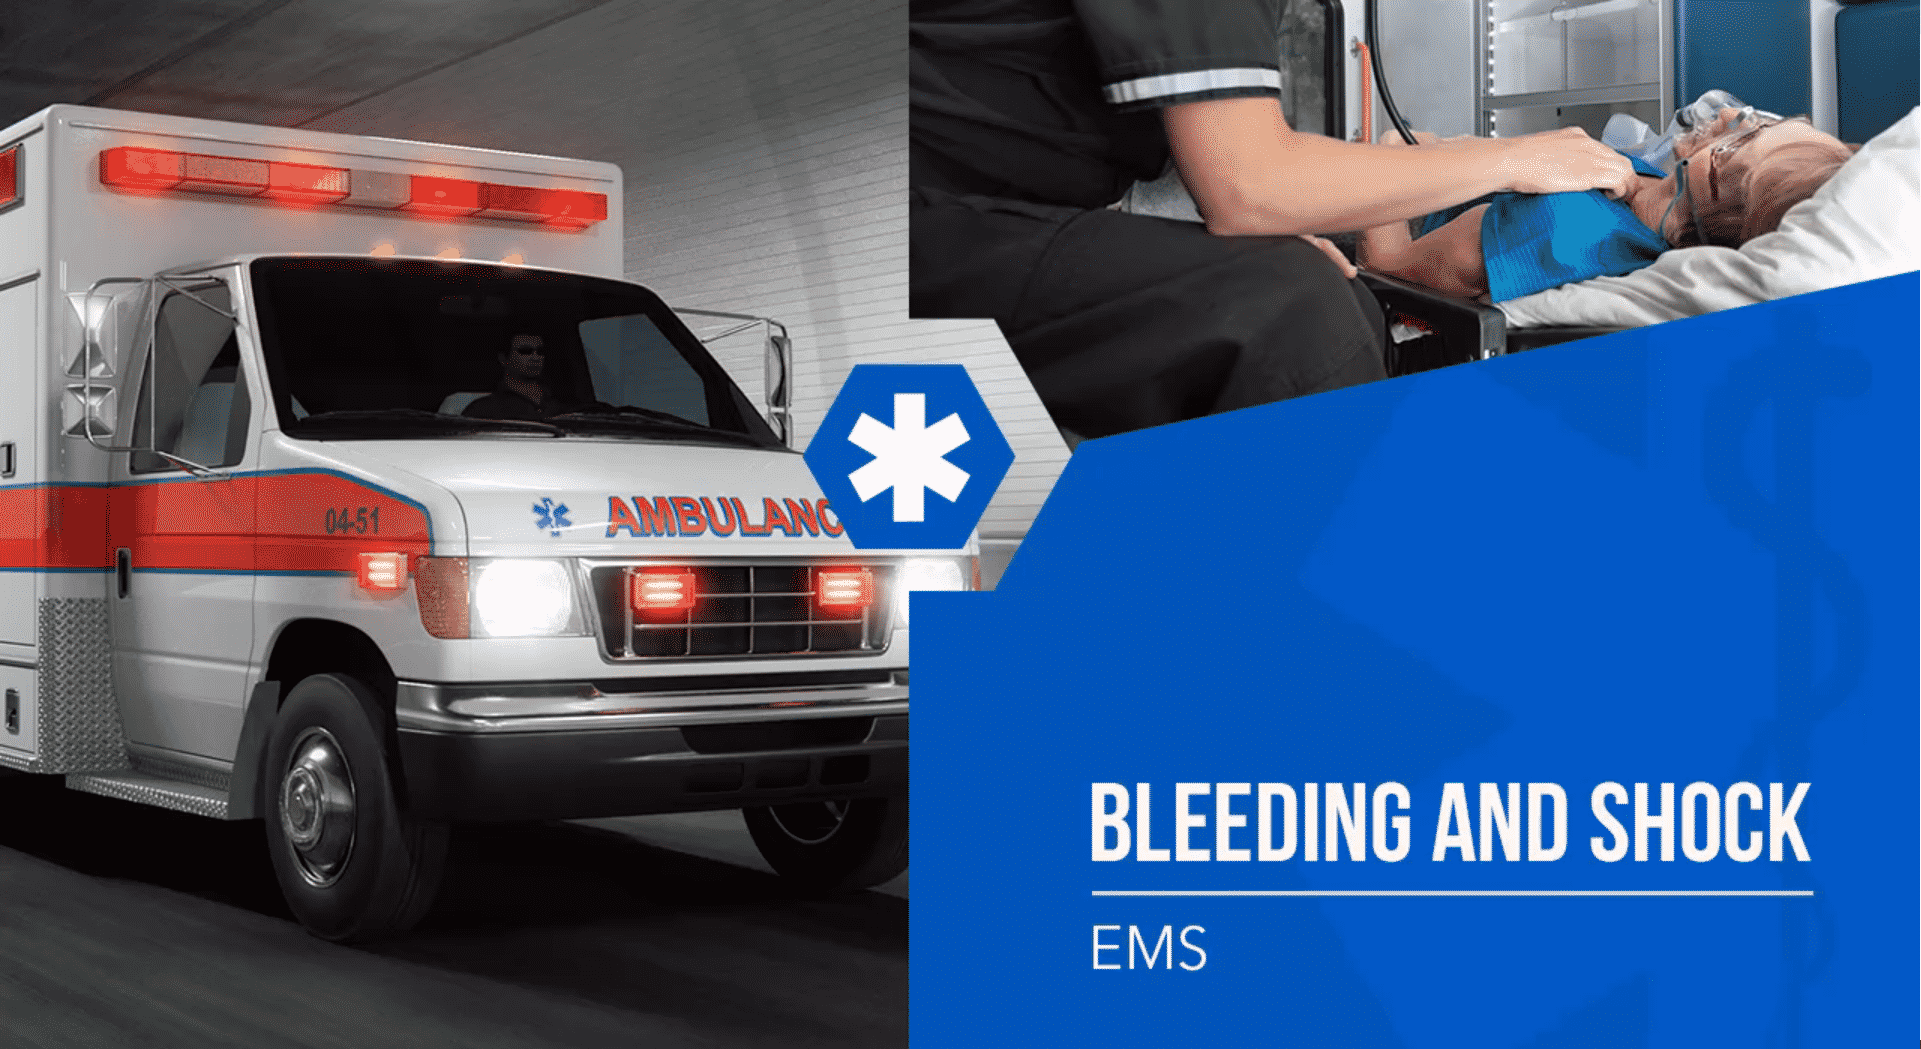 Bleeding and Shock course